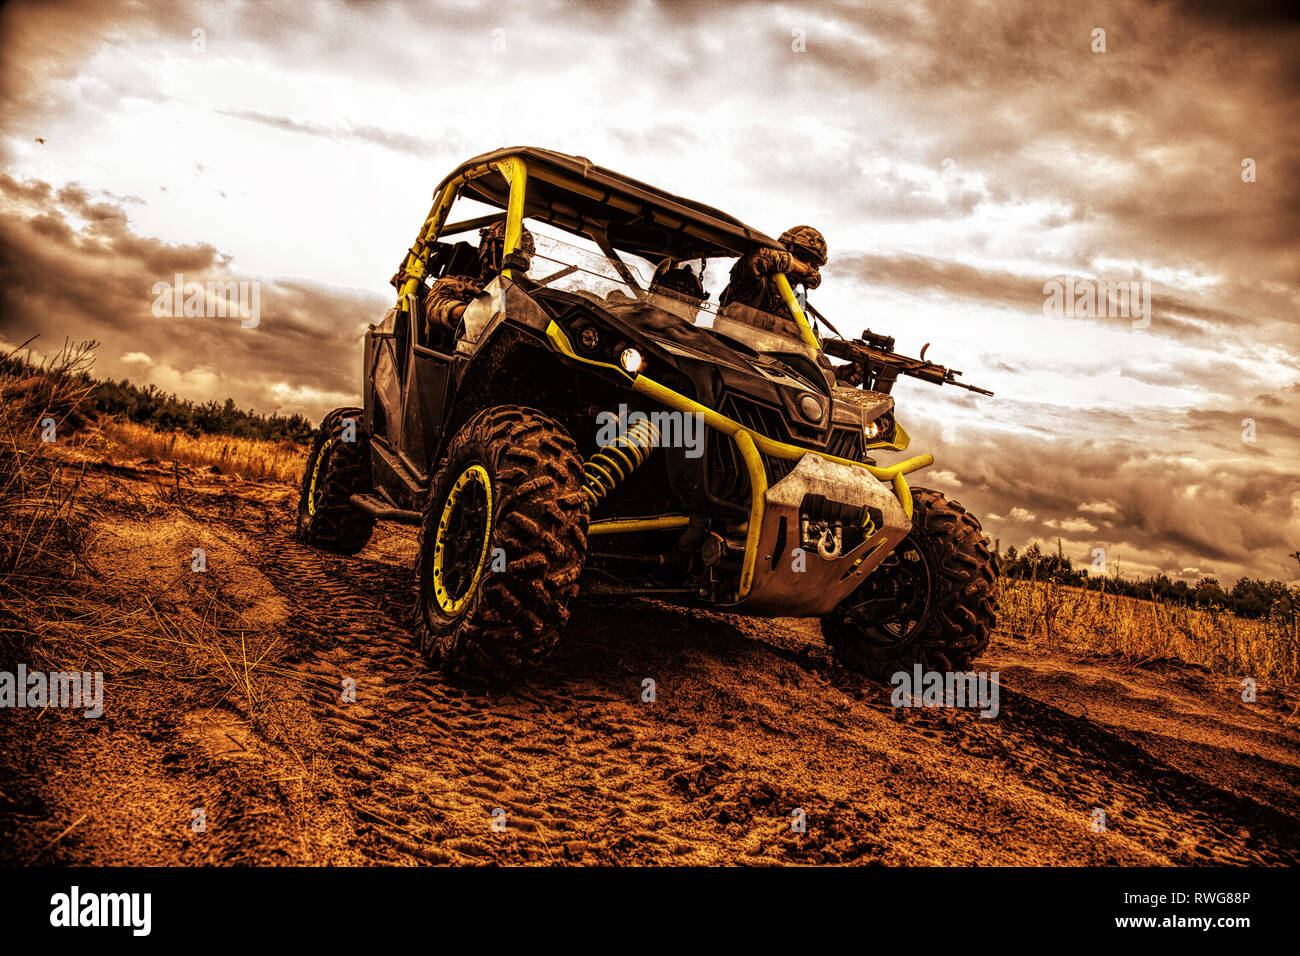 Mobile infantry team on patrol in an off-road military buggy. Stock Photo